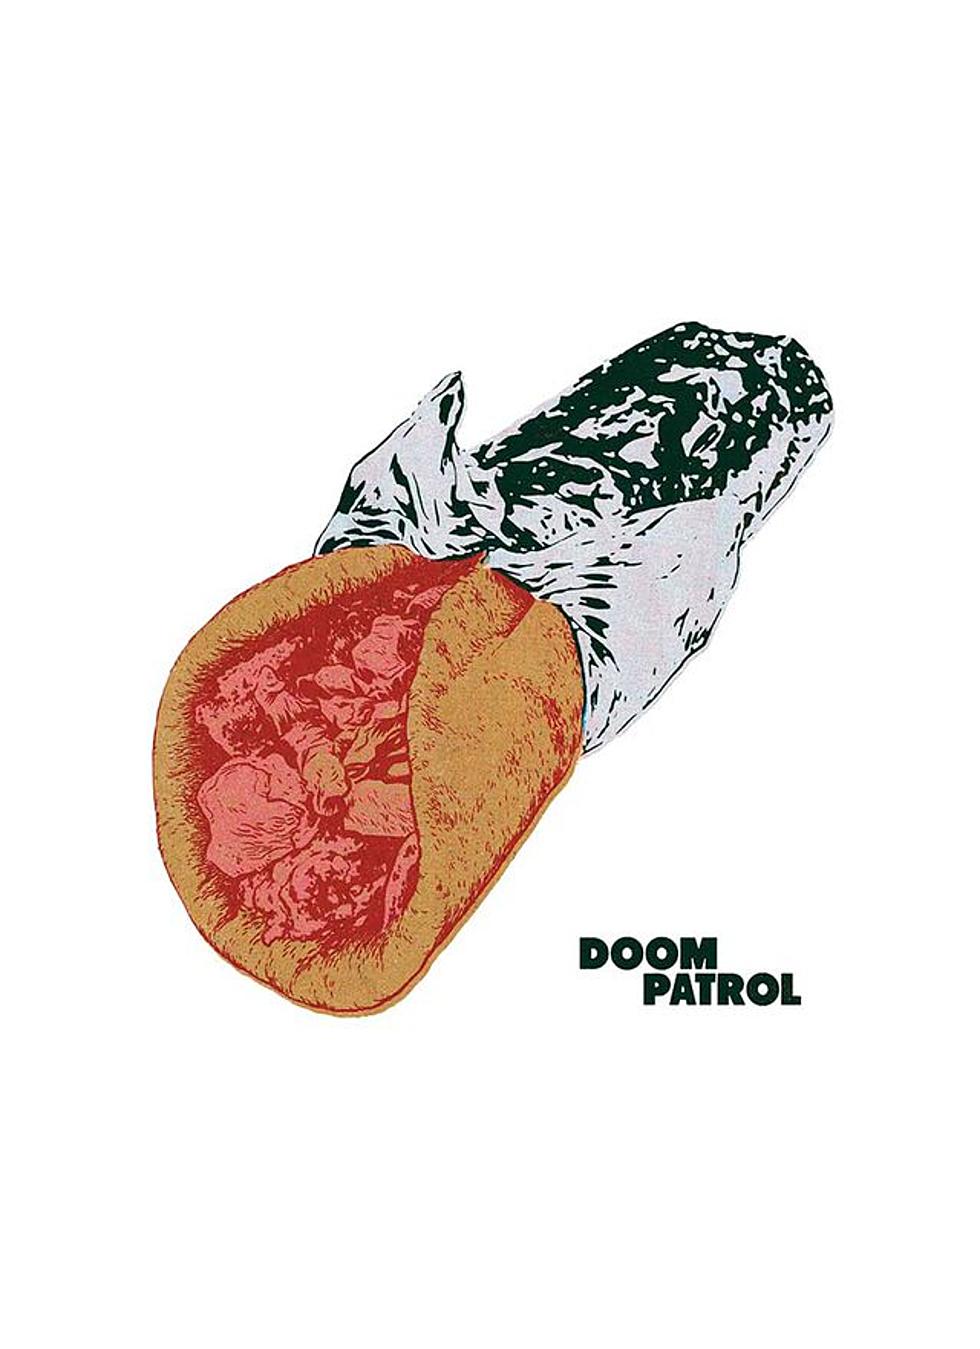 Do Good Things: Way, Derington And Bonvillain&#8217;s &#8216;Doom Patrol&#8217; #1 Marks A Strong Debut For Young Animal